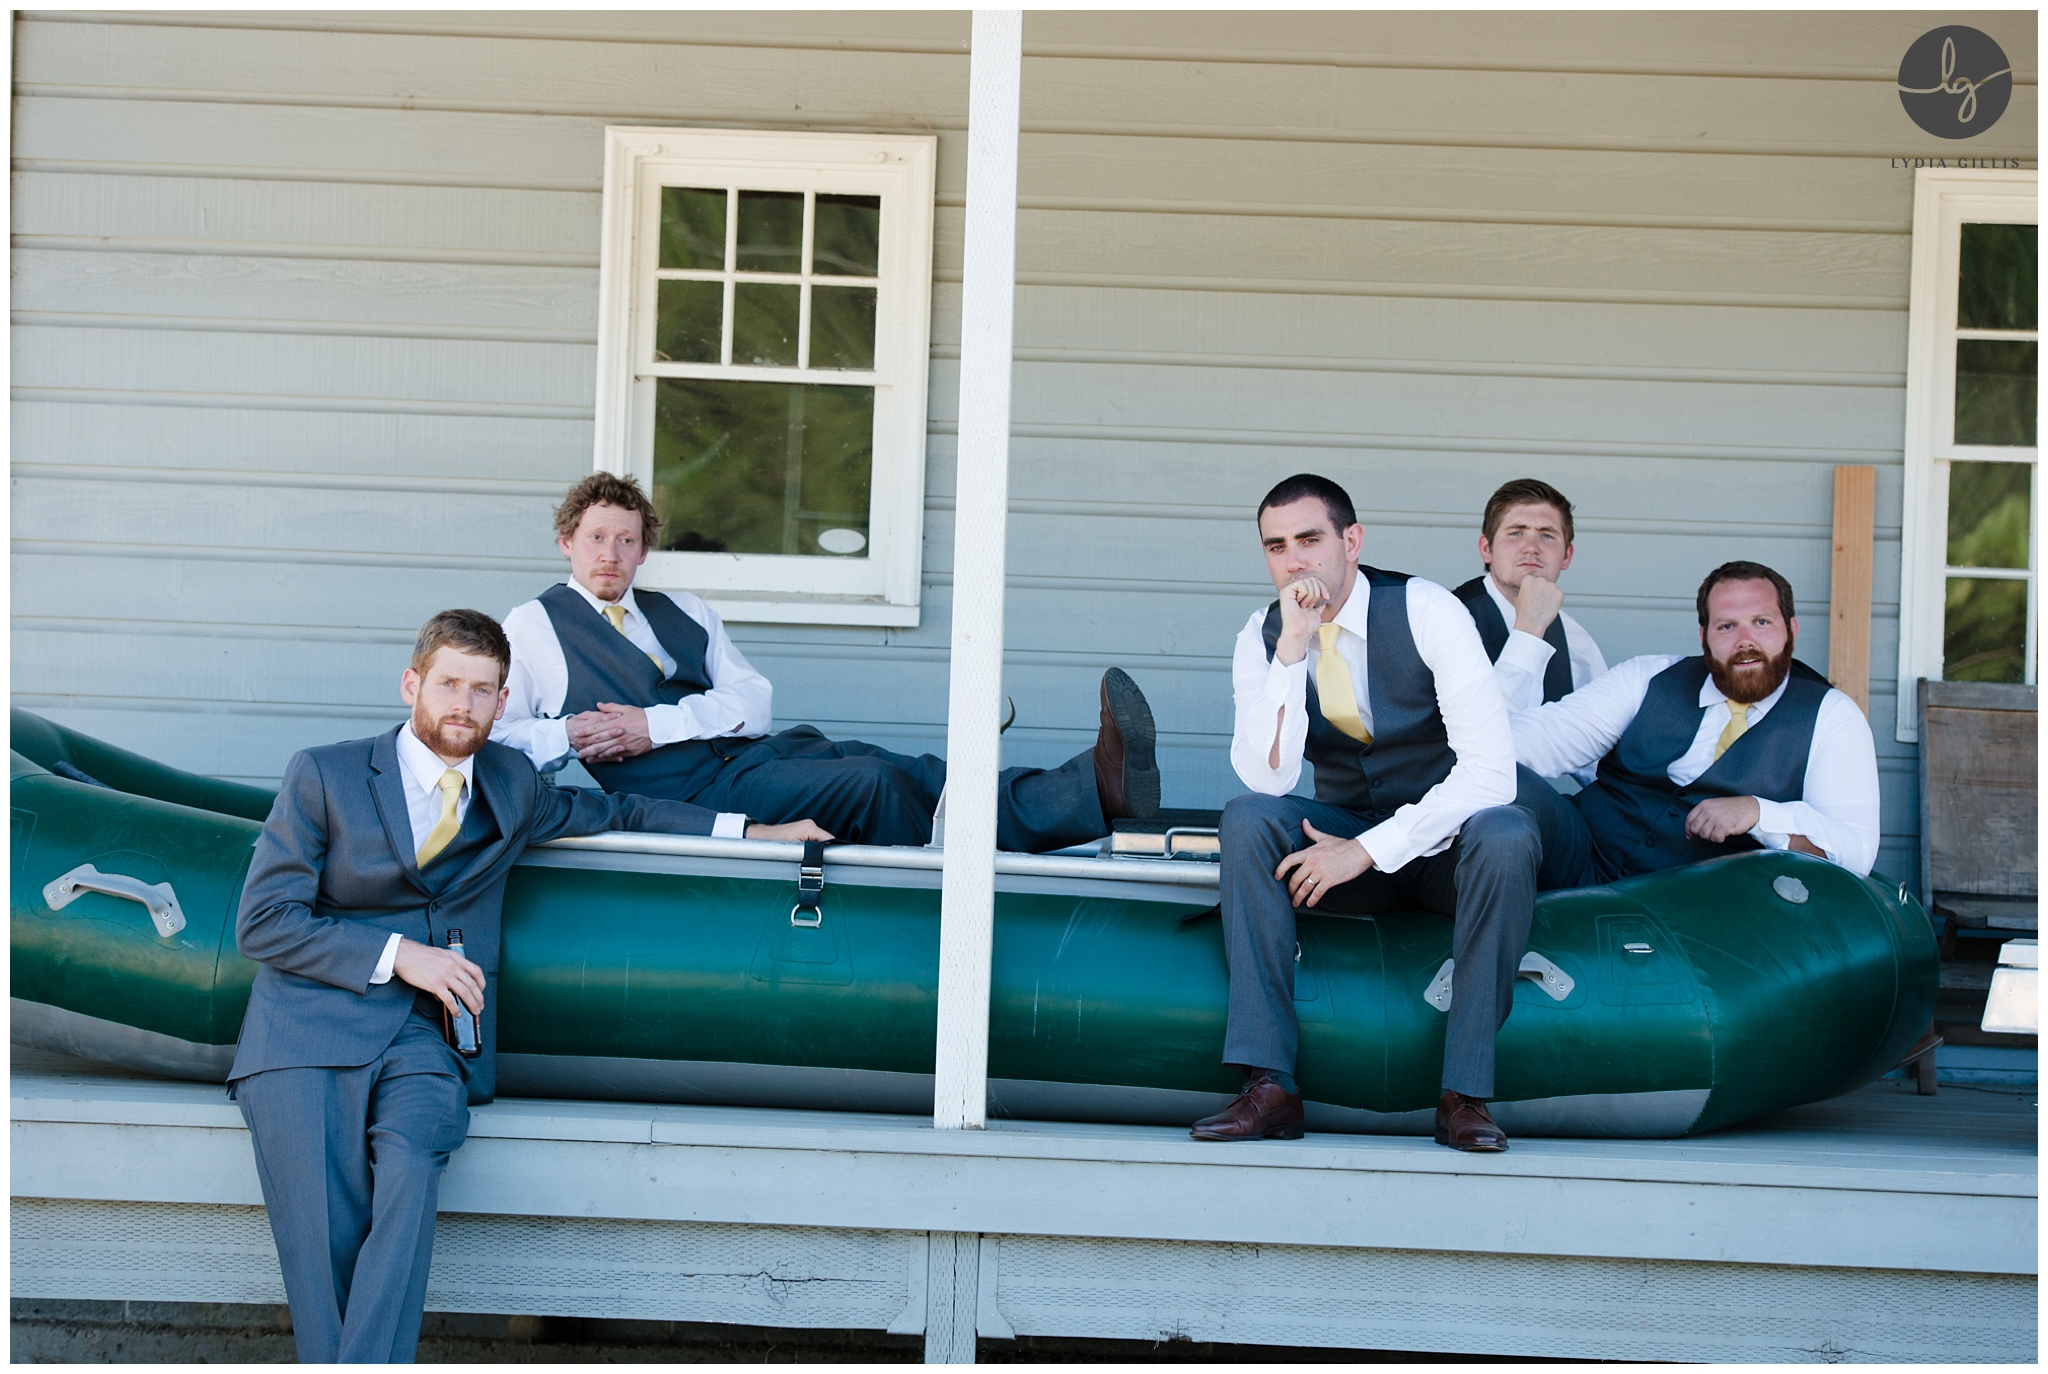 outdoor wedding, picture of wedding party sitting on a boat | Lydia Gillis Photography